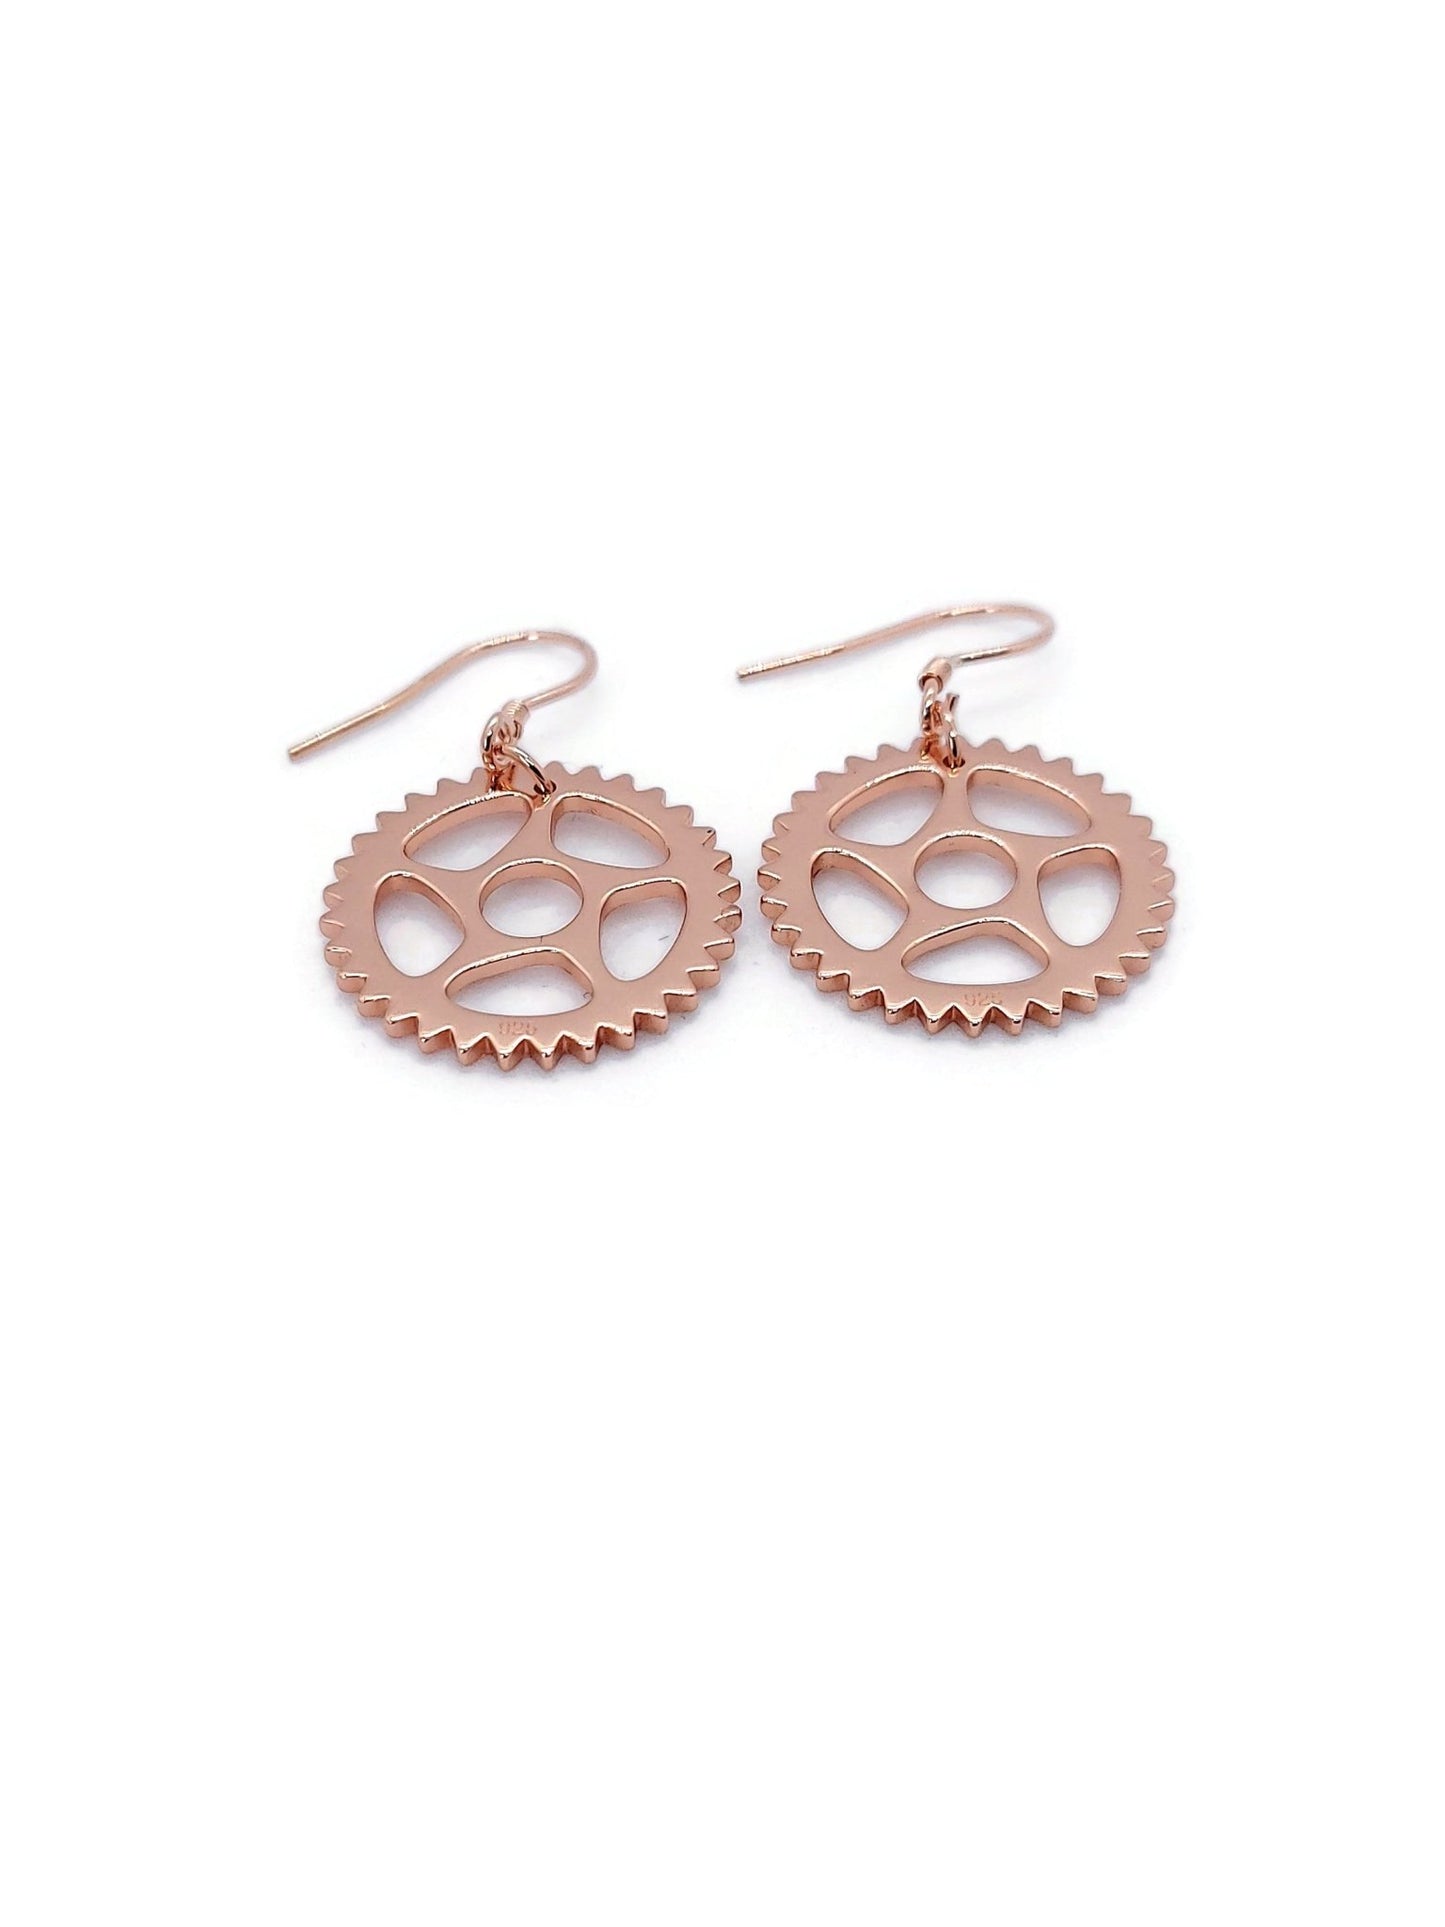 18 rose gold plated bike chain ring design dangle earrings with a white background-2